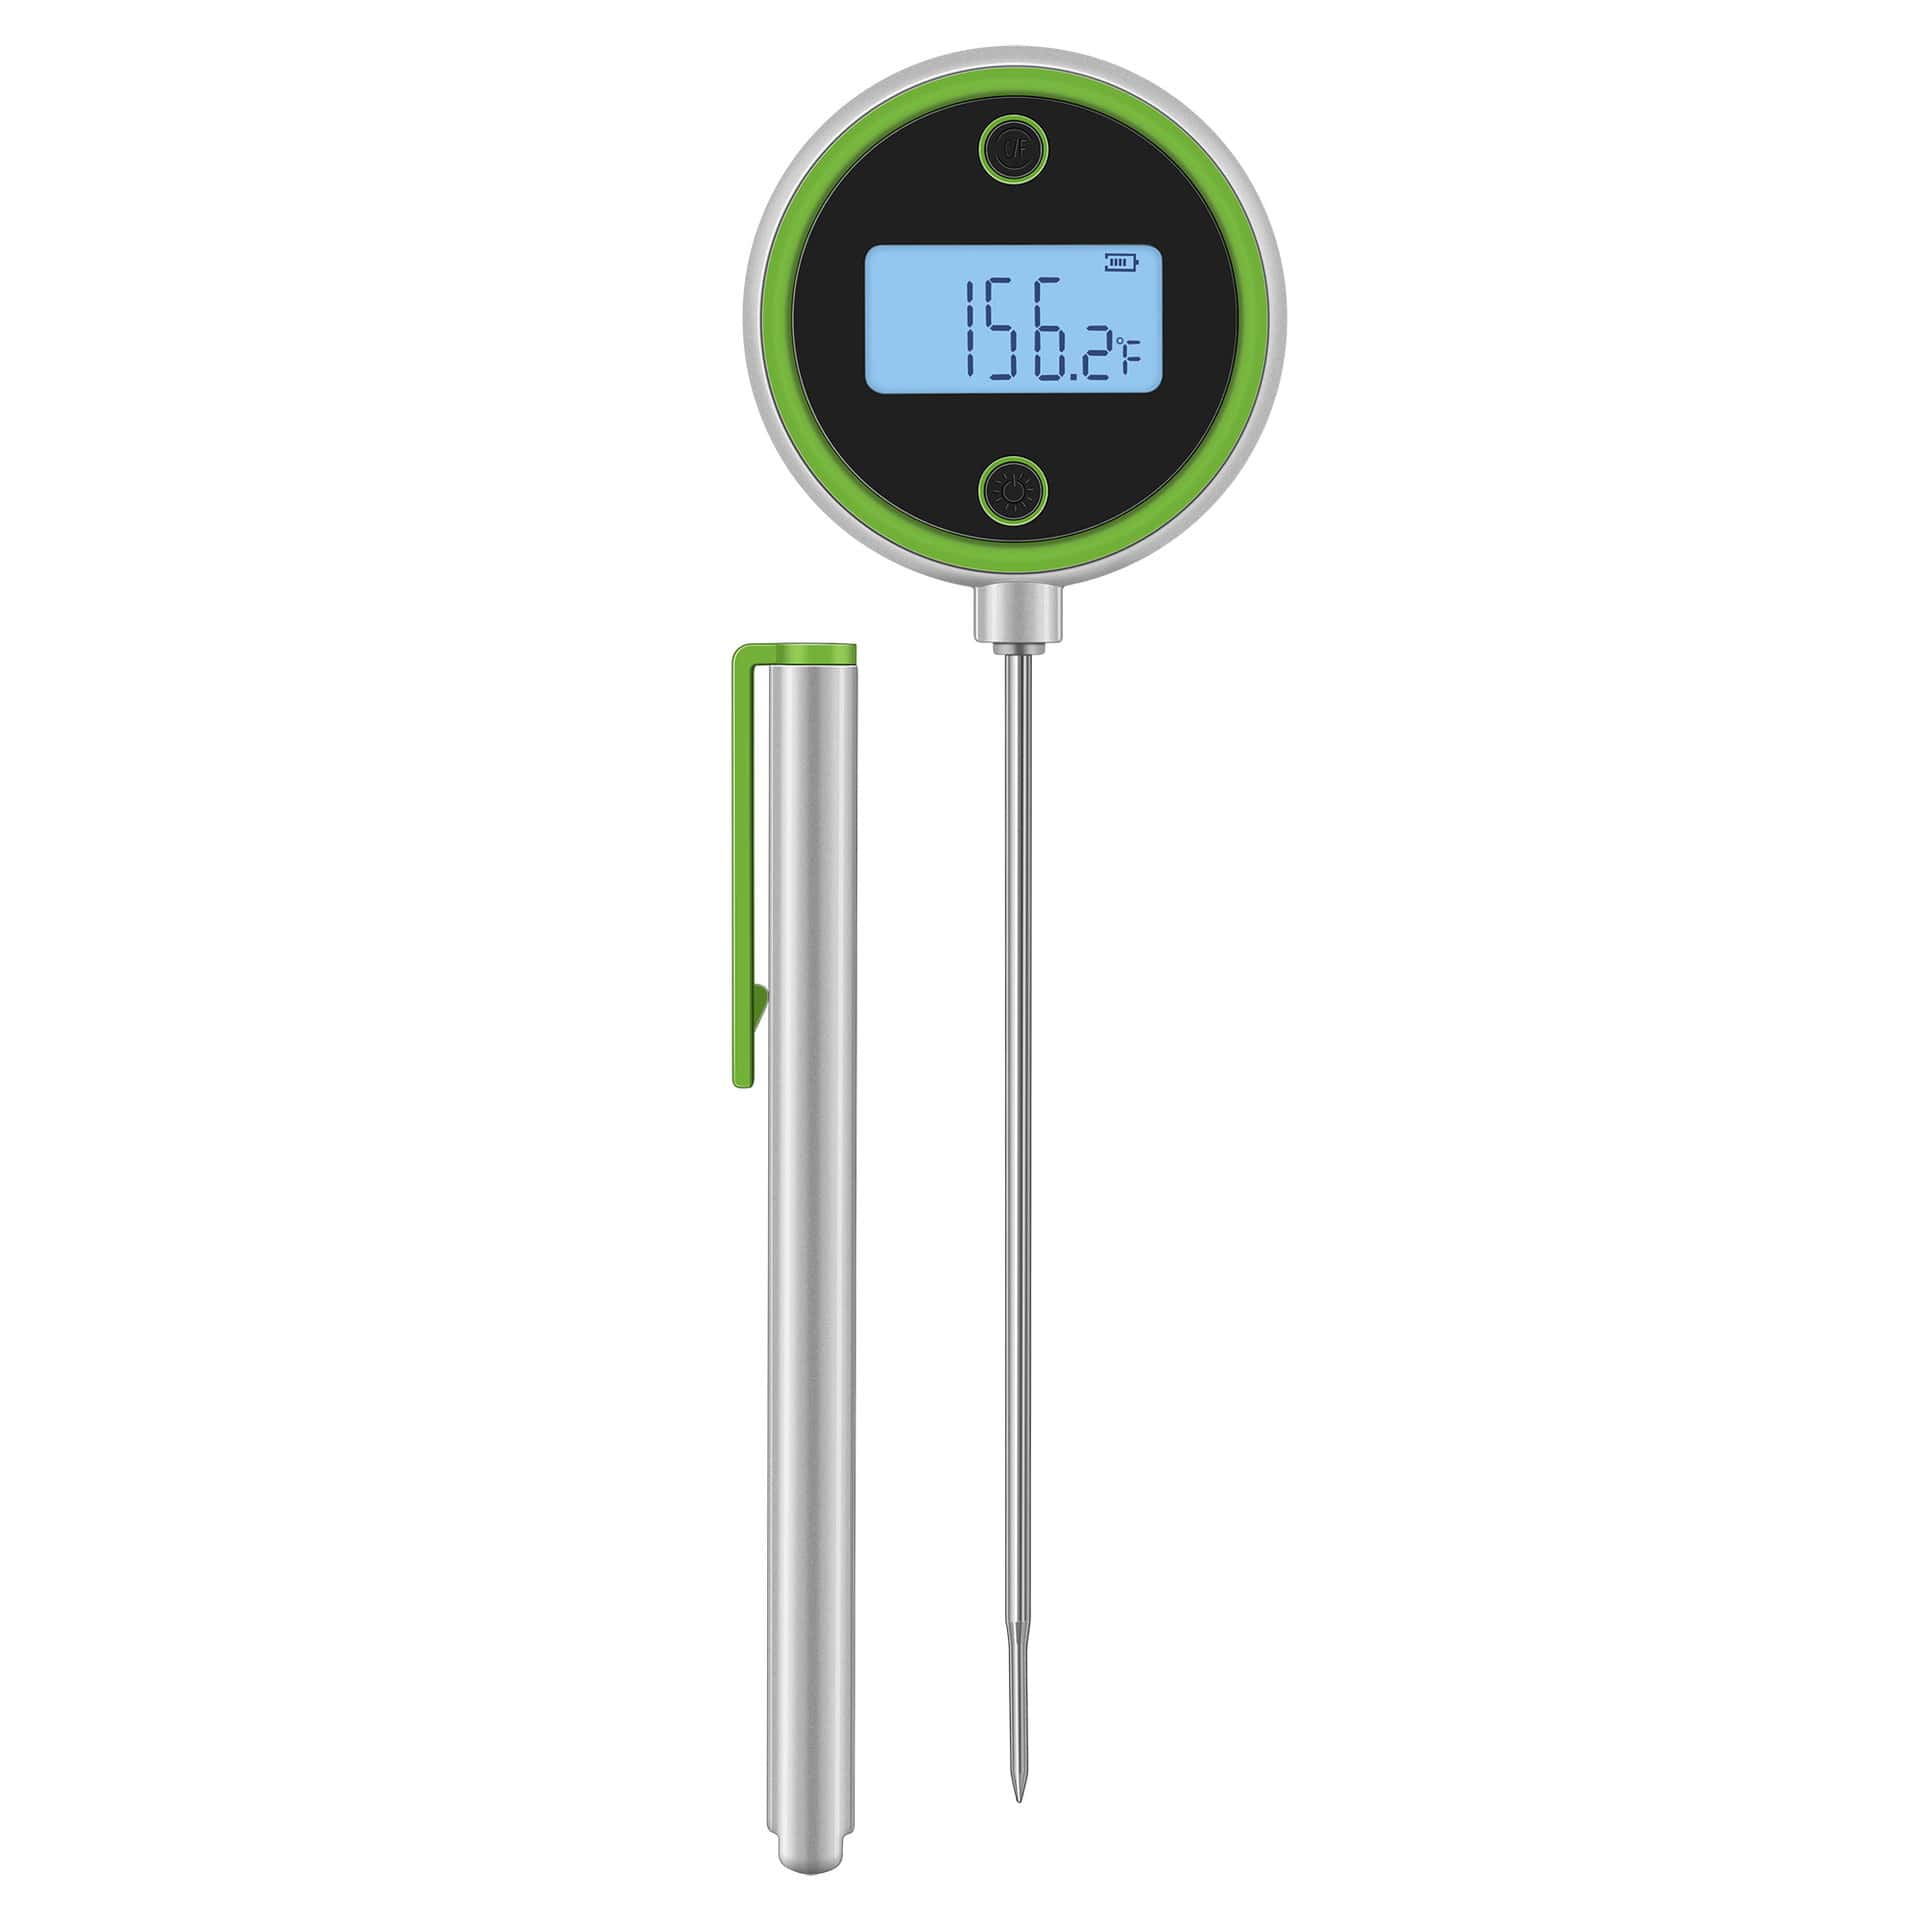 https://www.chefstemp.com/wp-content/uploads/2021/08/chefstemp-pocket-pro-cooking-thermometer-05.jpg